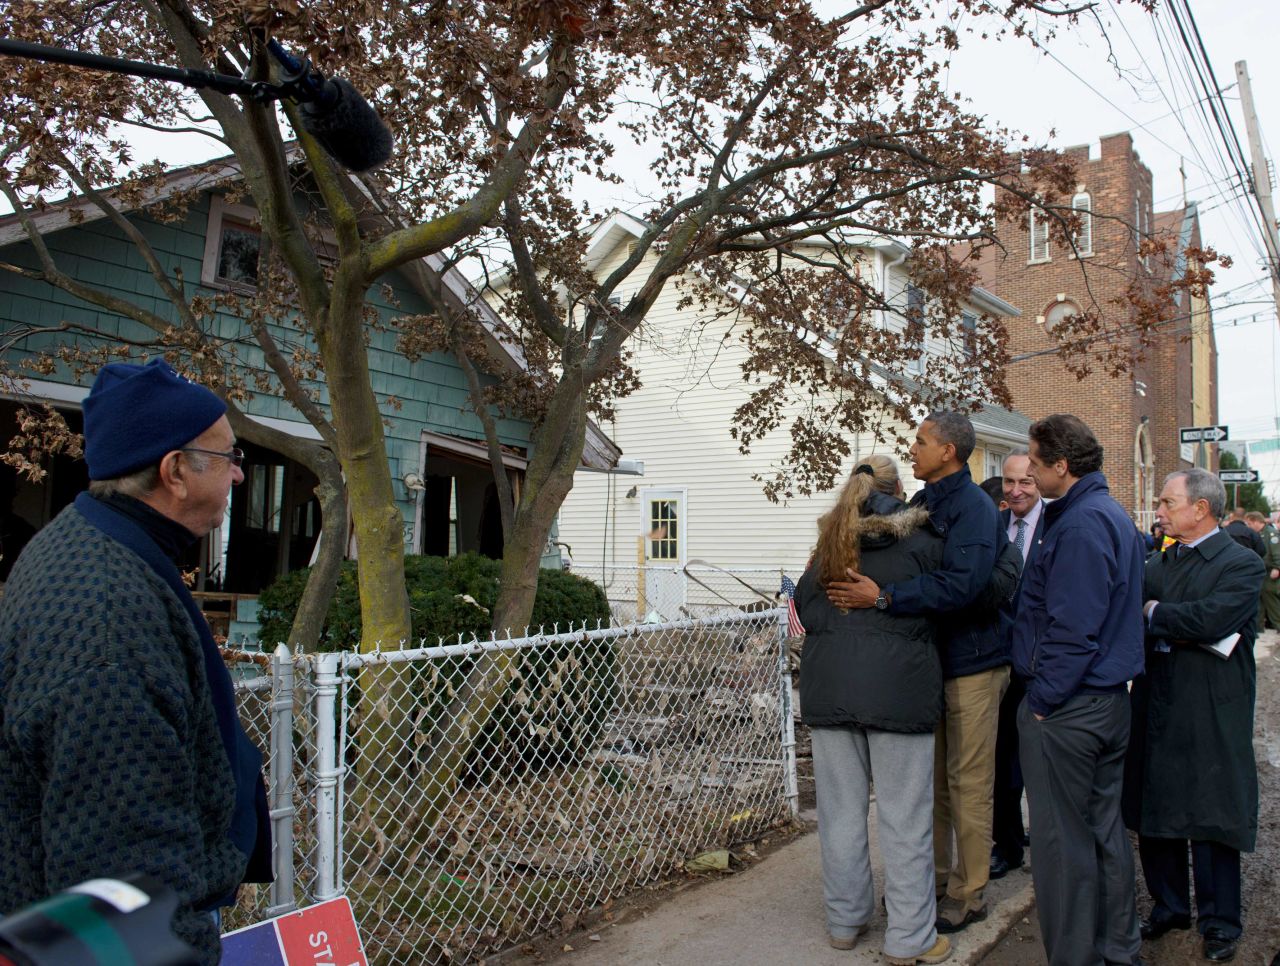 President Barack Obama embraces a local resident on Cedar Grove Avenue during a visit to Staten Island on Thursday, November 15.